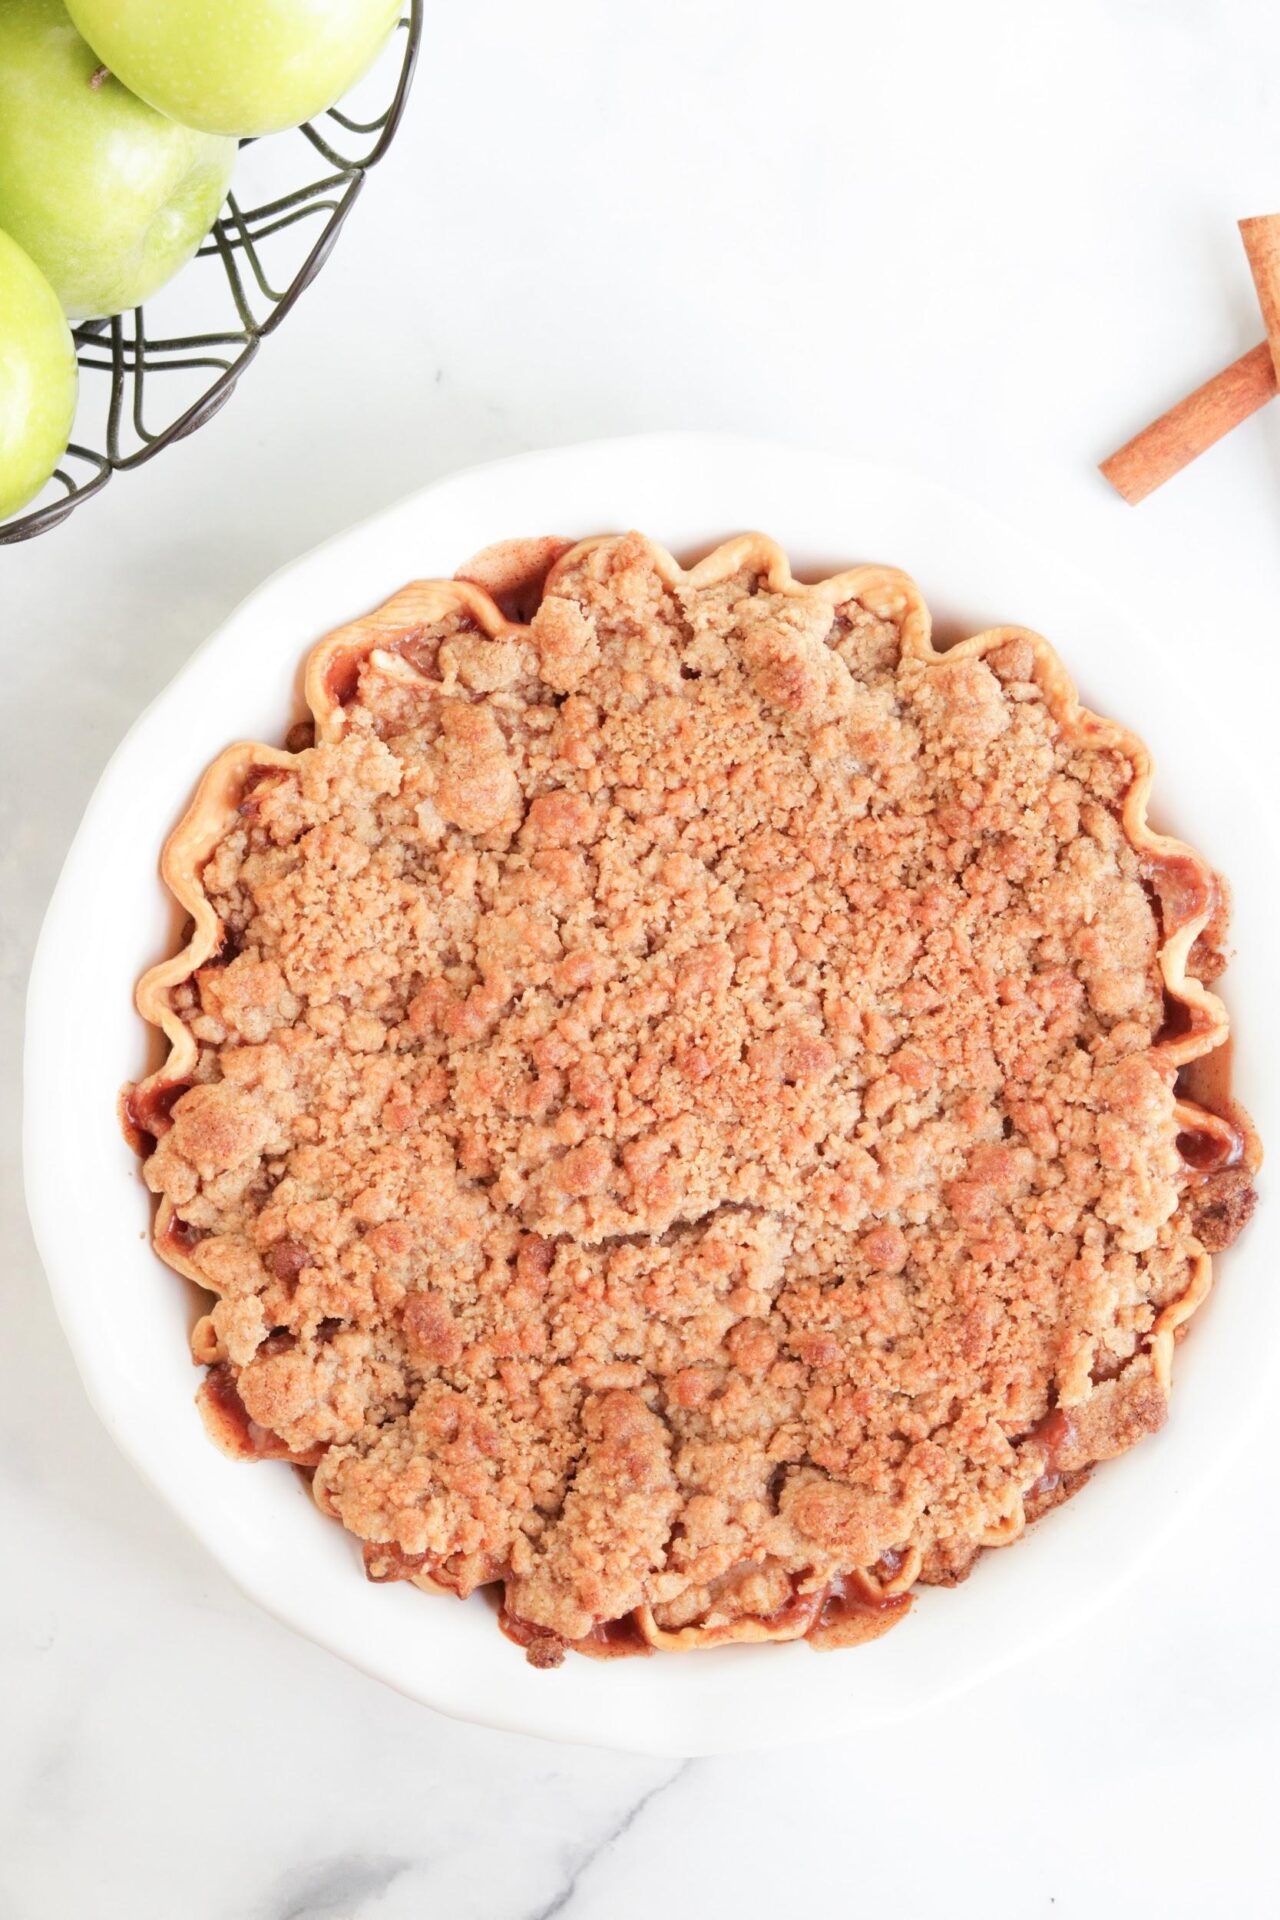 Apple crumble pie is quickly becoming one of my favorite apple pie recipes. It is so simple and easy to make and is a crowd favorite! 